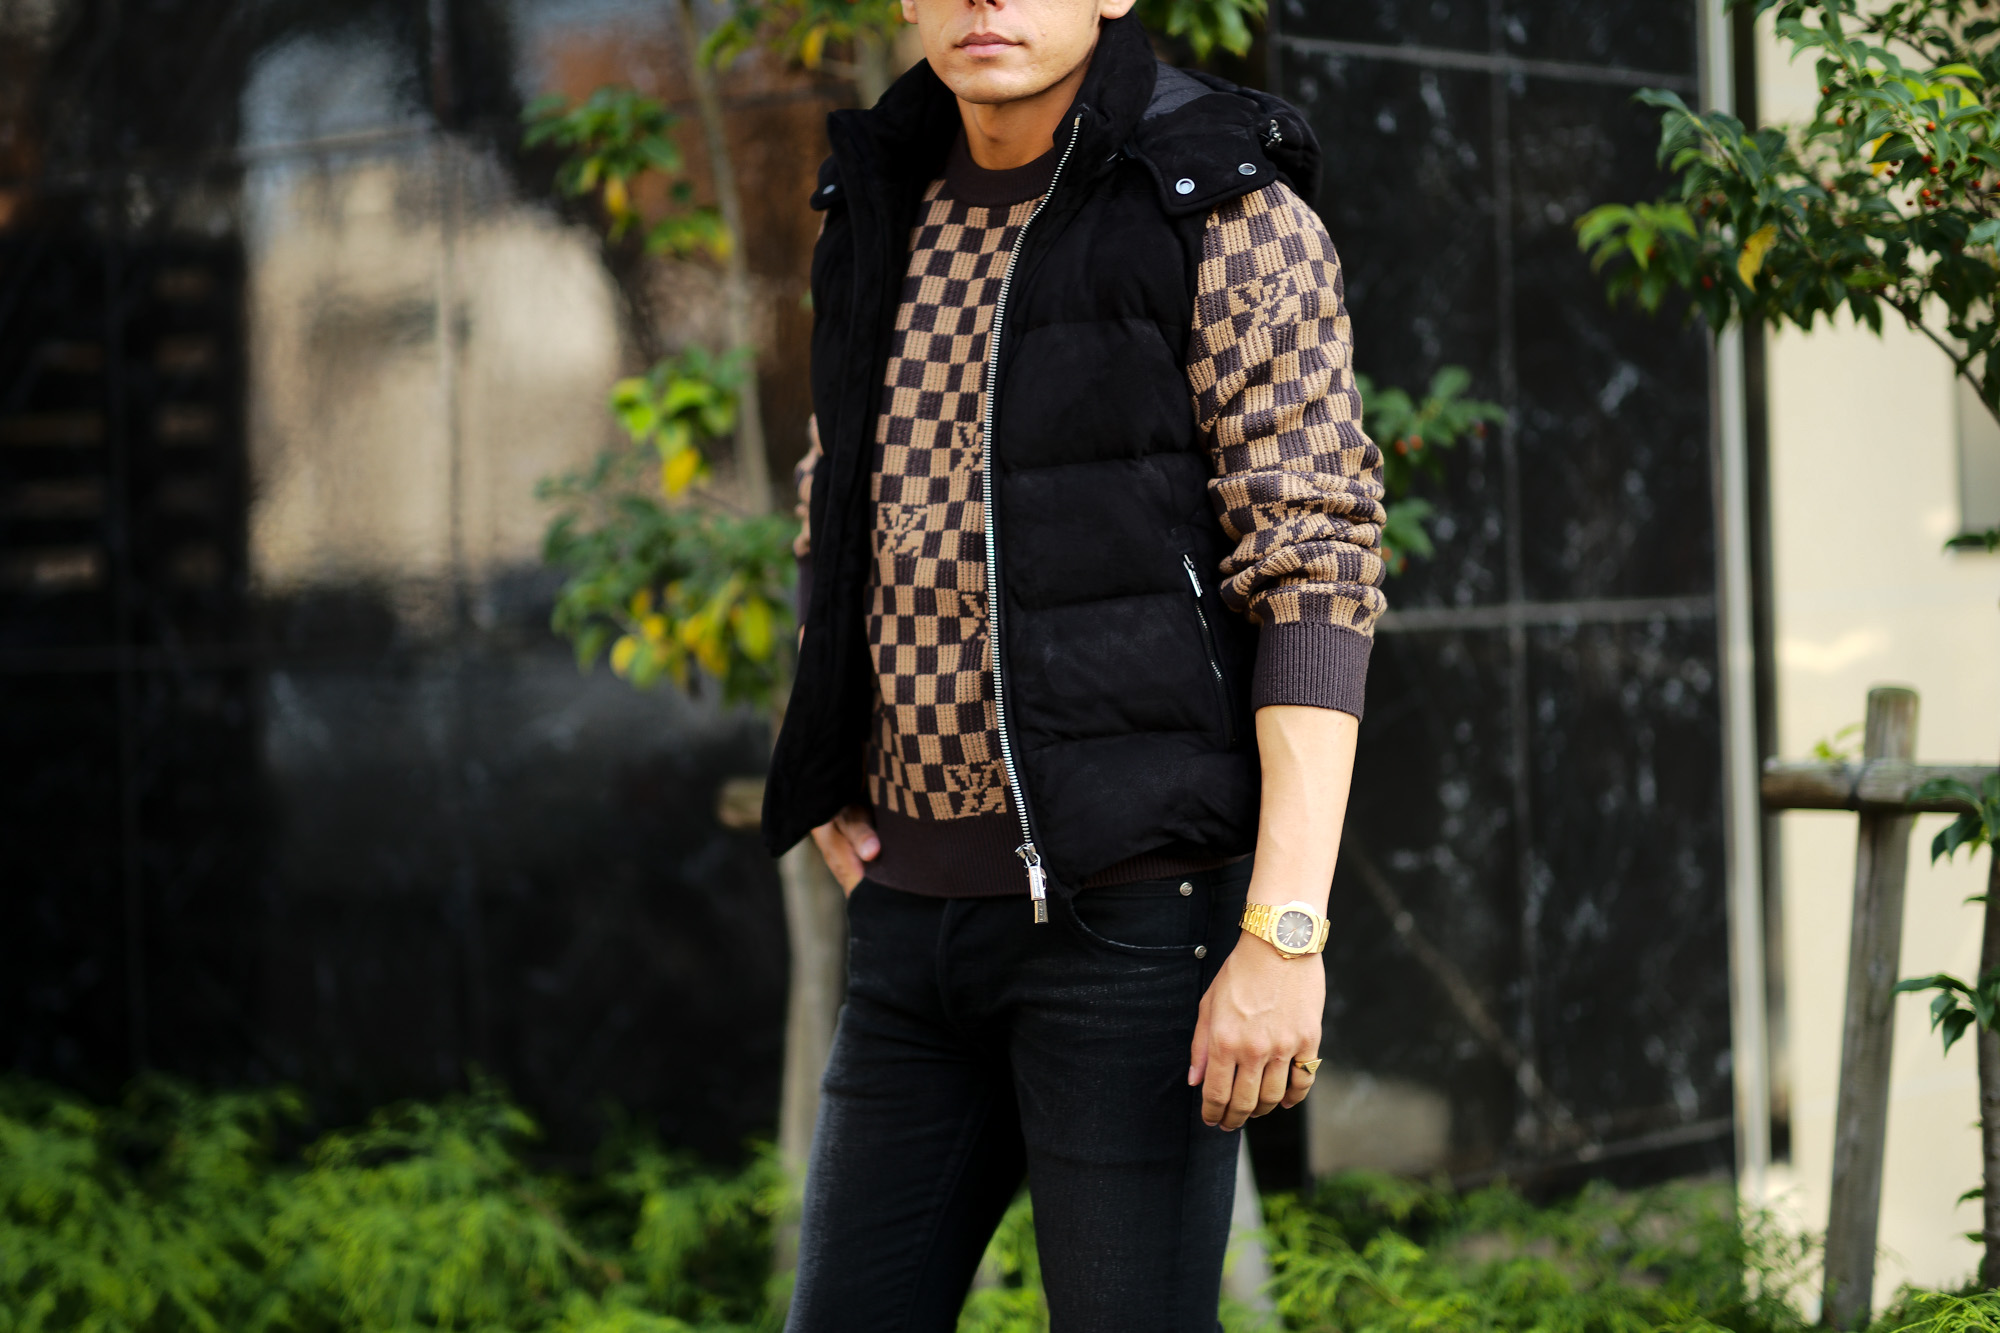 MOORER (ムーレー) FAYER-UR (フェイヤー) Suede Leather Down Vest スエードレザー ダウンベスト NERO (ブラック) Made in italy (イタリア製) 2021 秋冬 【Alto e Diritto別注】【Special Special Special Model】【ご予約開始】愛知 名古屋 Alto e Diritto altoediritto アルトエデリット レザーベスト